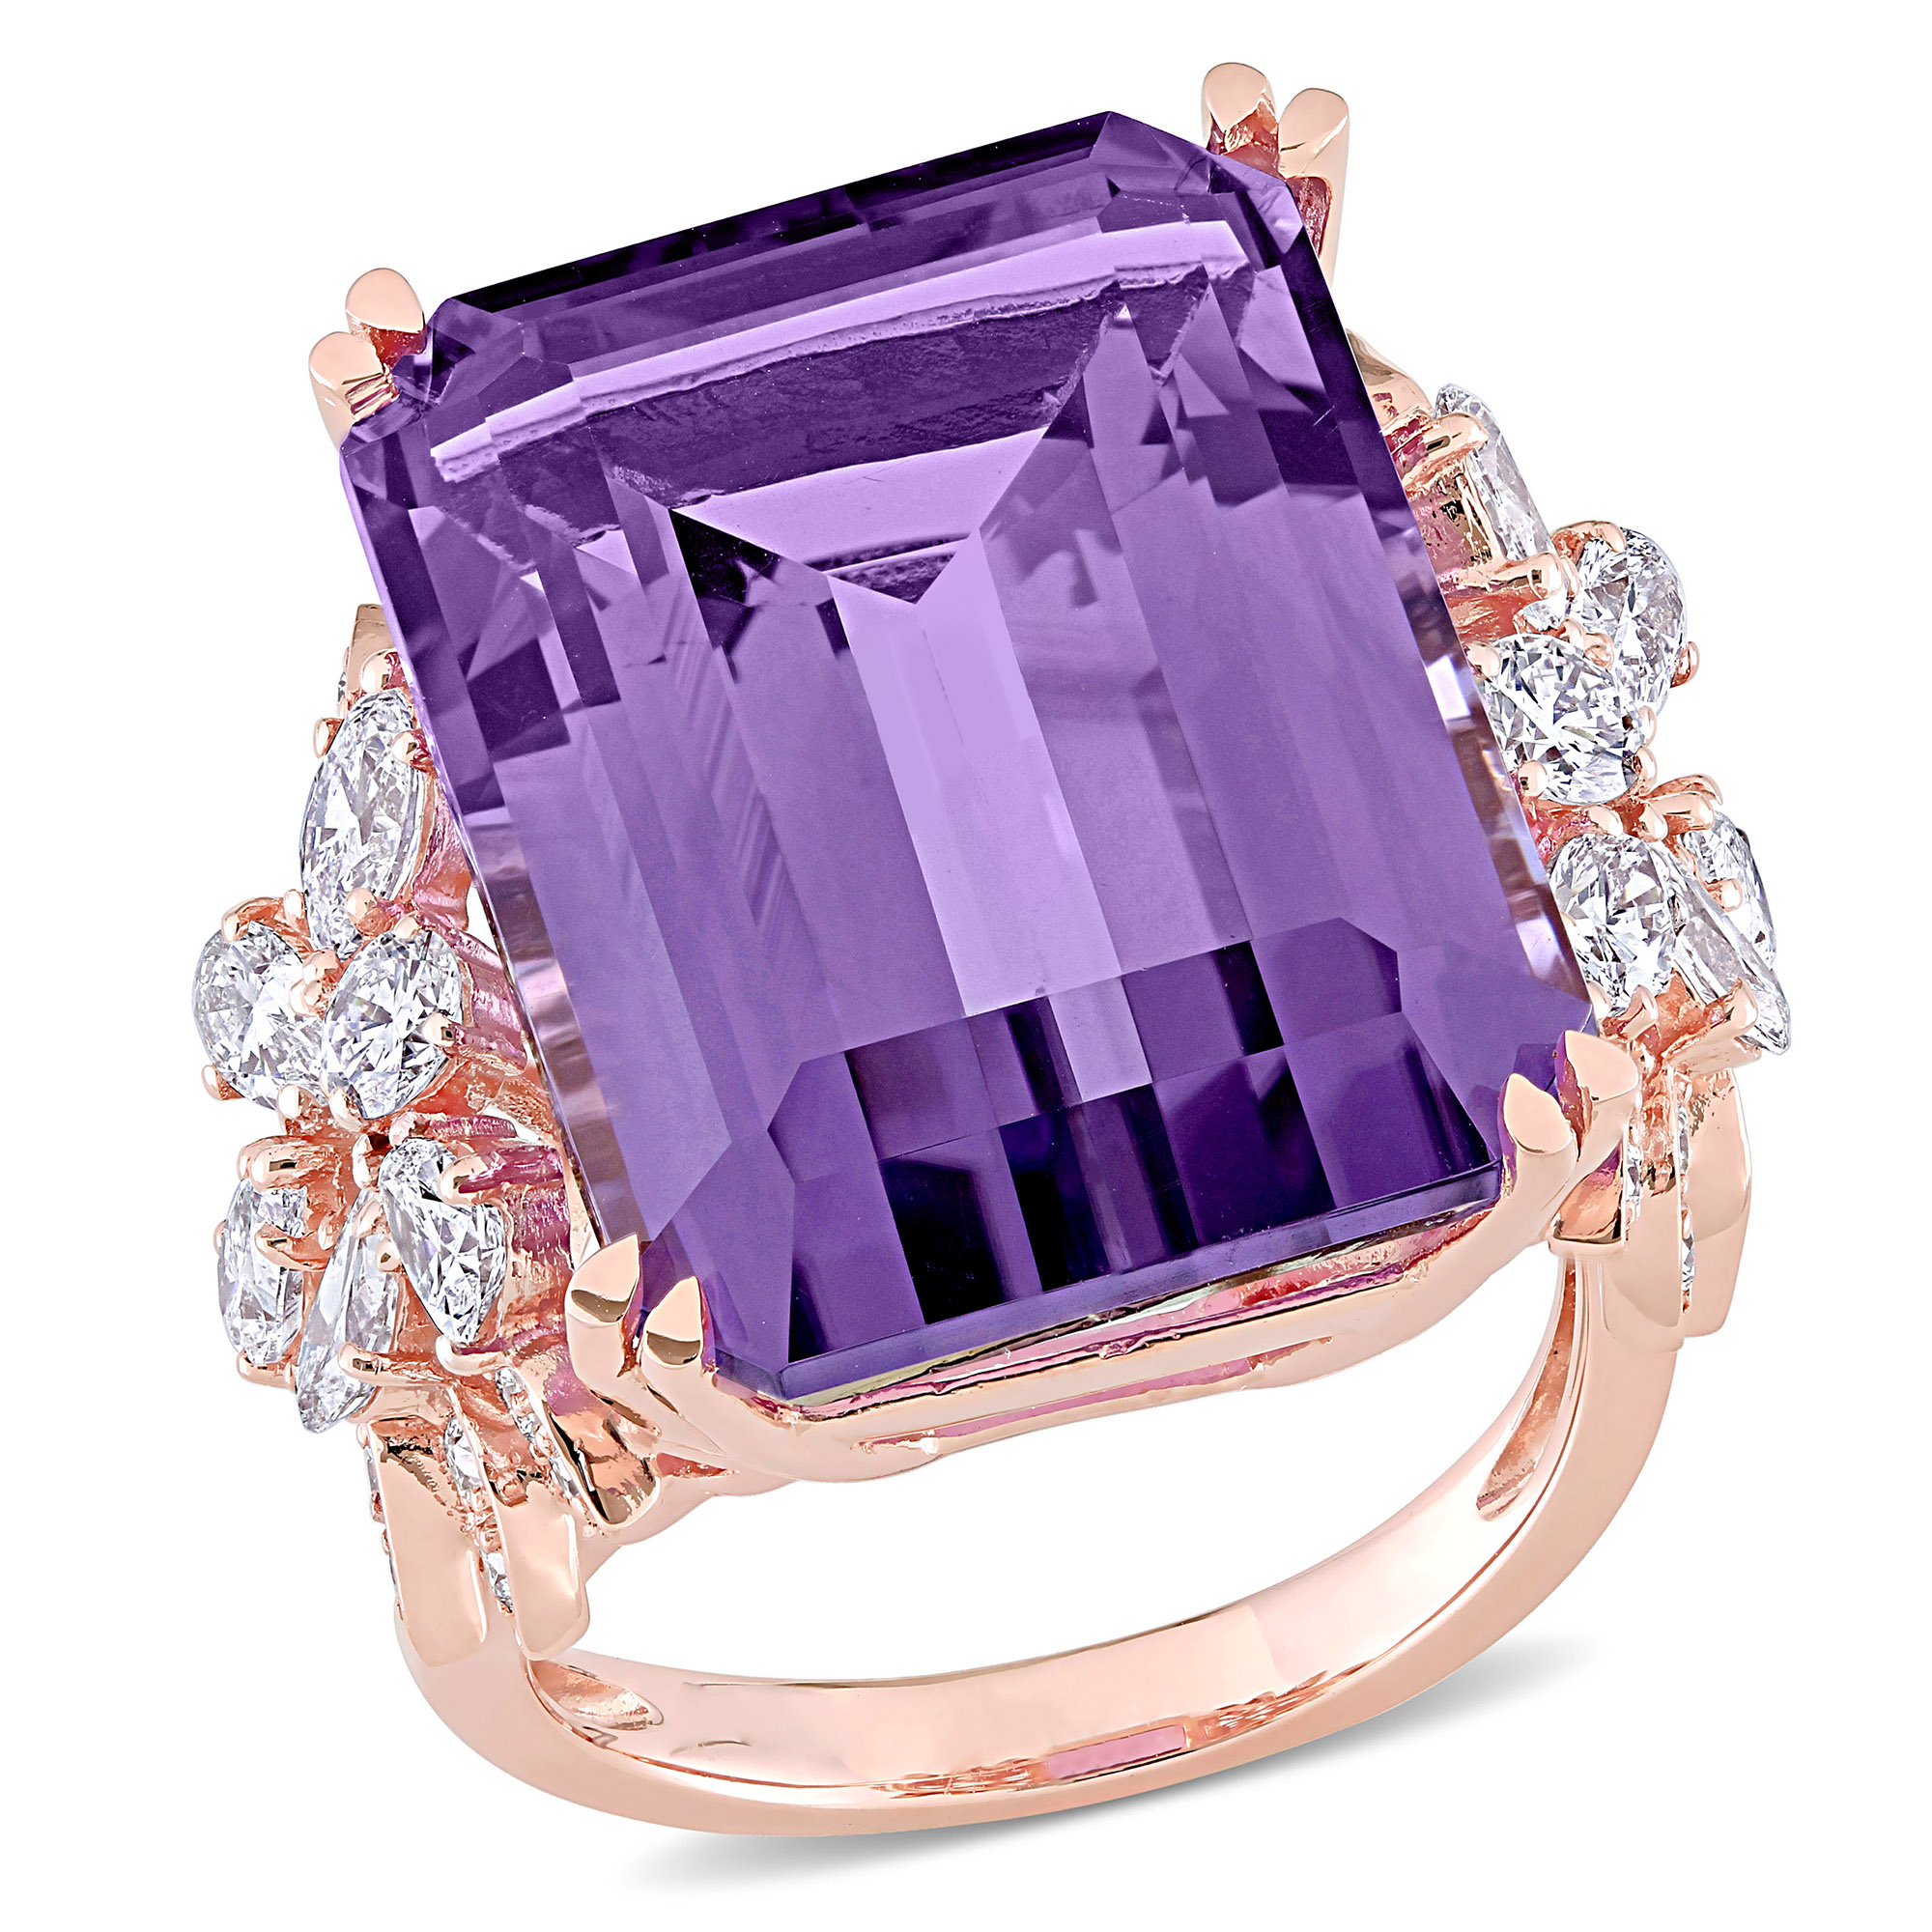 20 CT TGW Octagon Shaped Amethyst Ring with 1 3/4 CT TW Diamonds ...